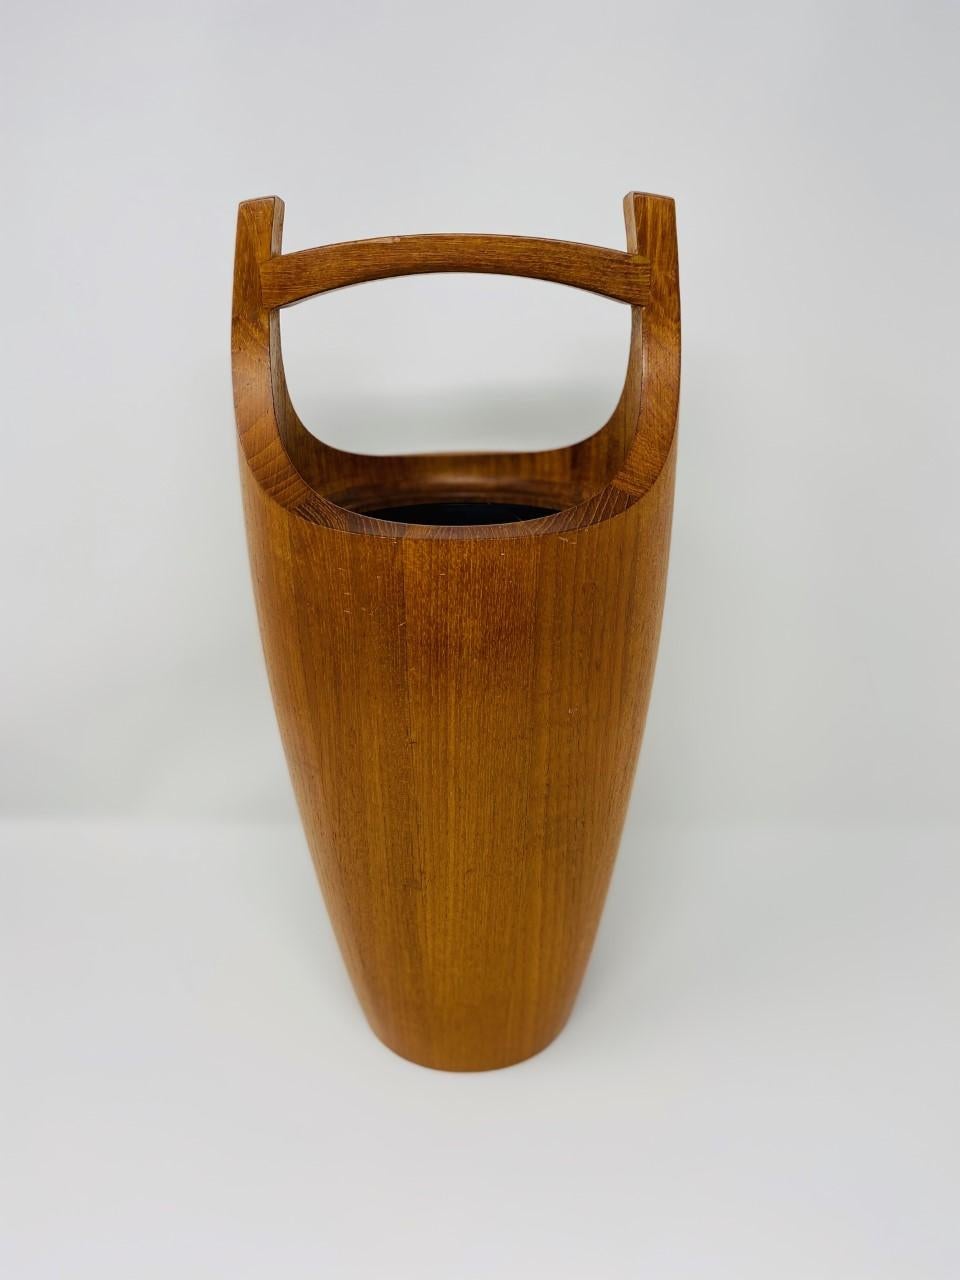 Hand-Crafted Vintage Mid Century Teak “Congo” Ice Bucket by Jens Harald Quistgaard for Dansk